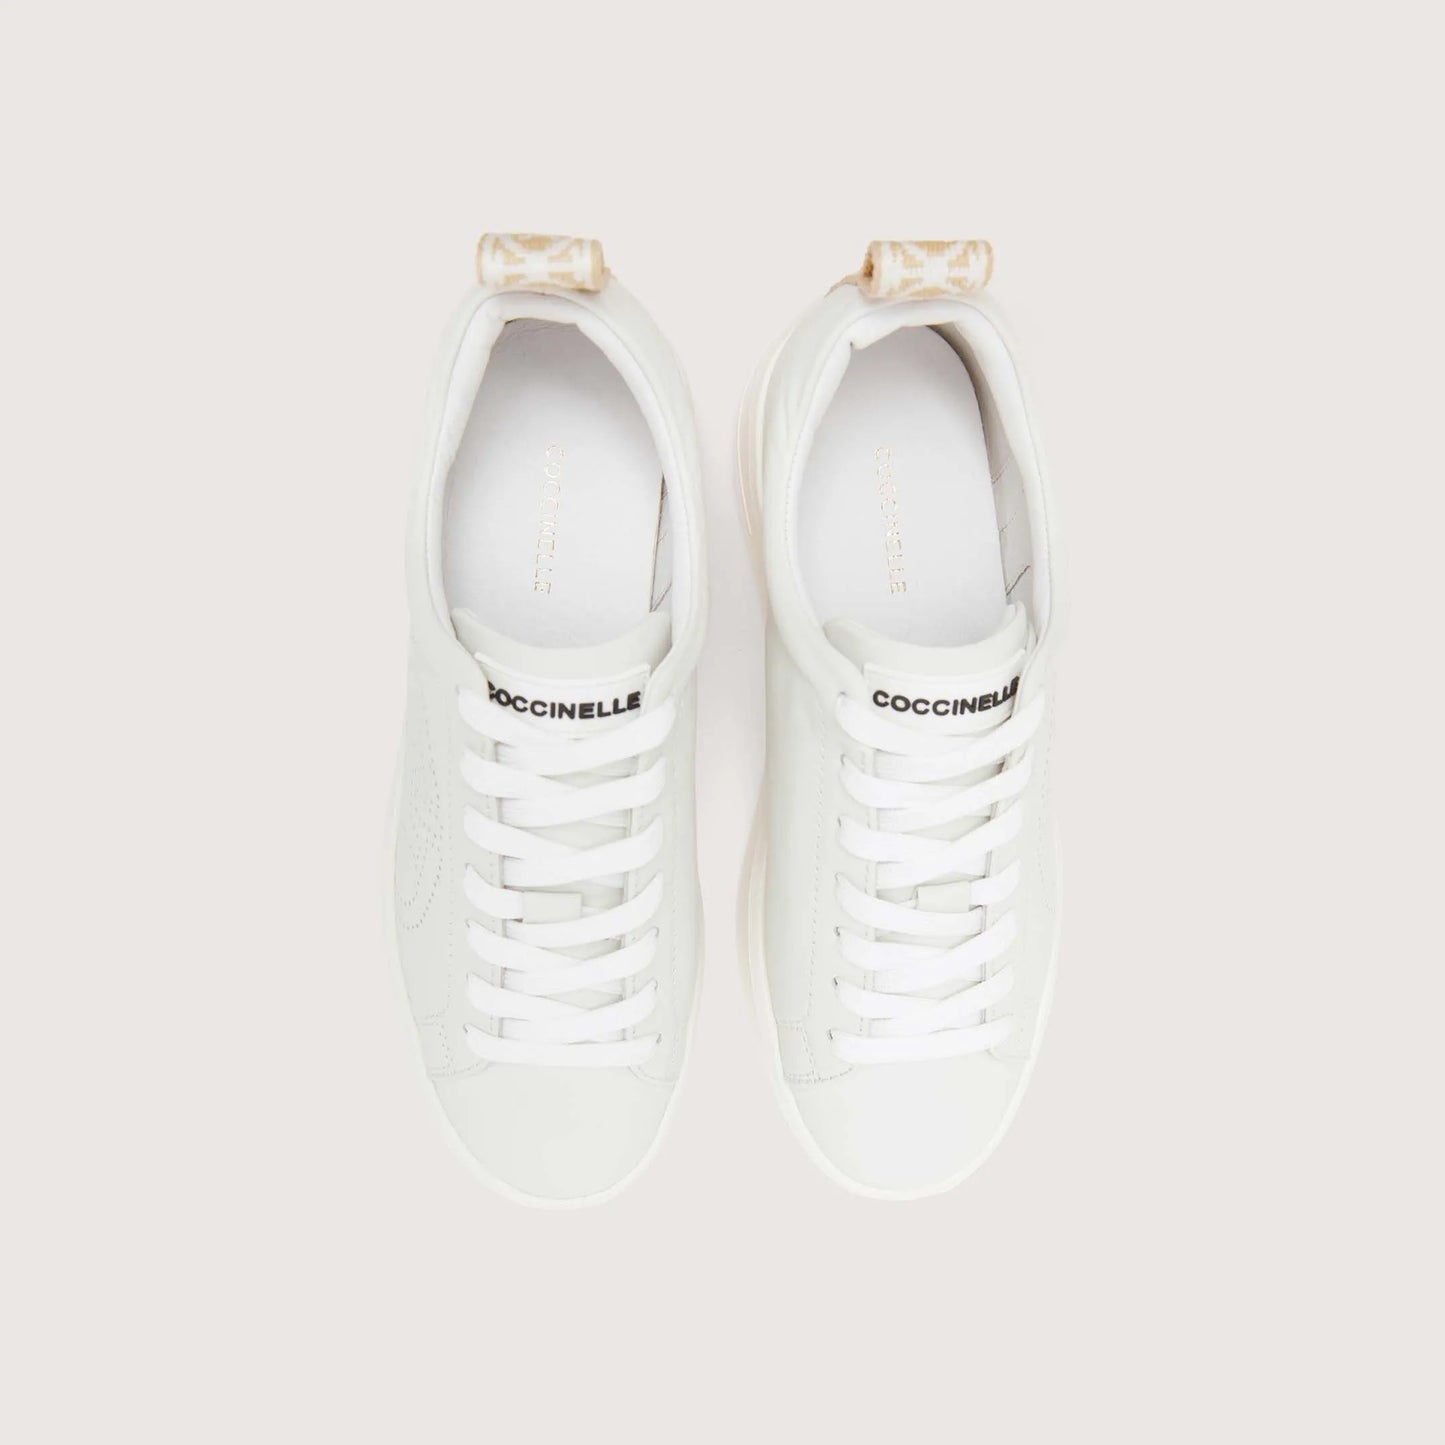 COCCINELLE MONOGRAM PERFOREE SNEAKERS